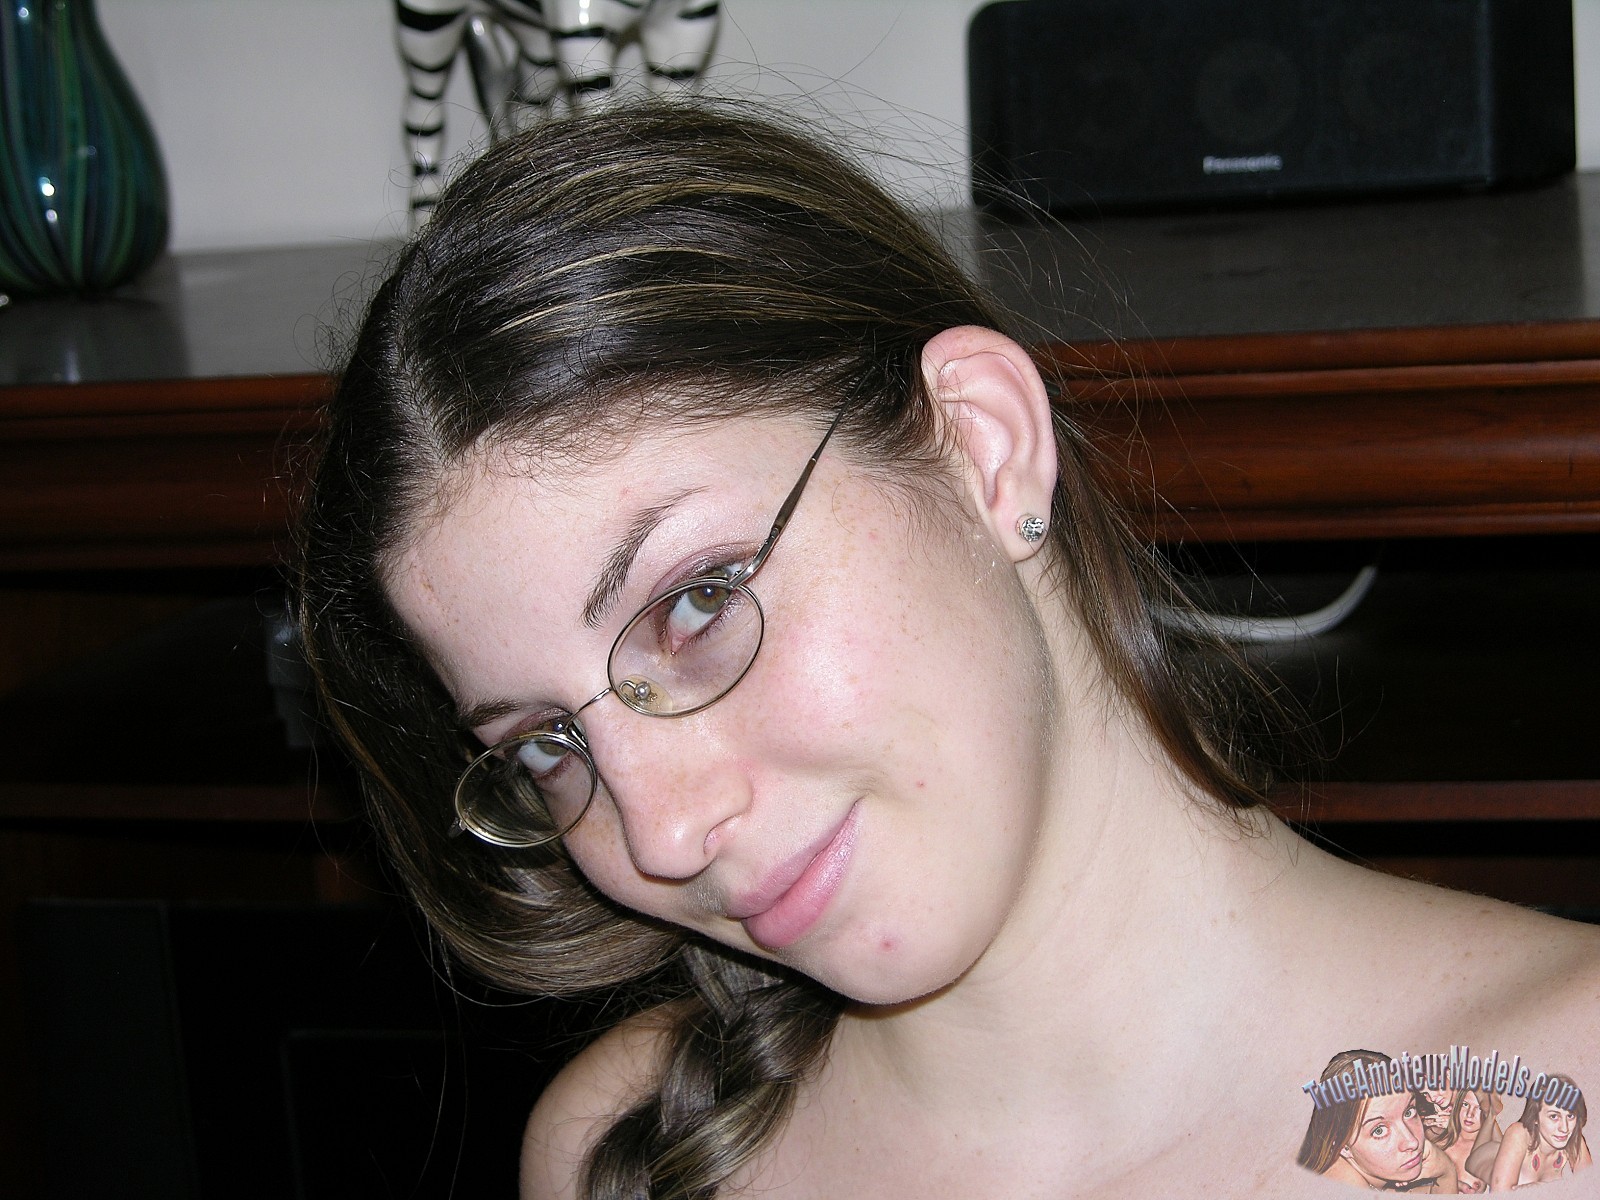 xpics - sex in glasses Amateur tiny breasted petite teen in glasses image